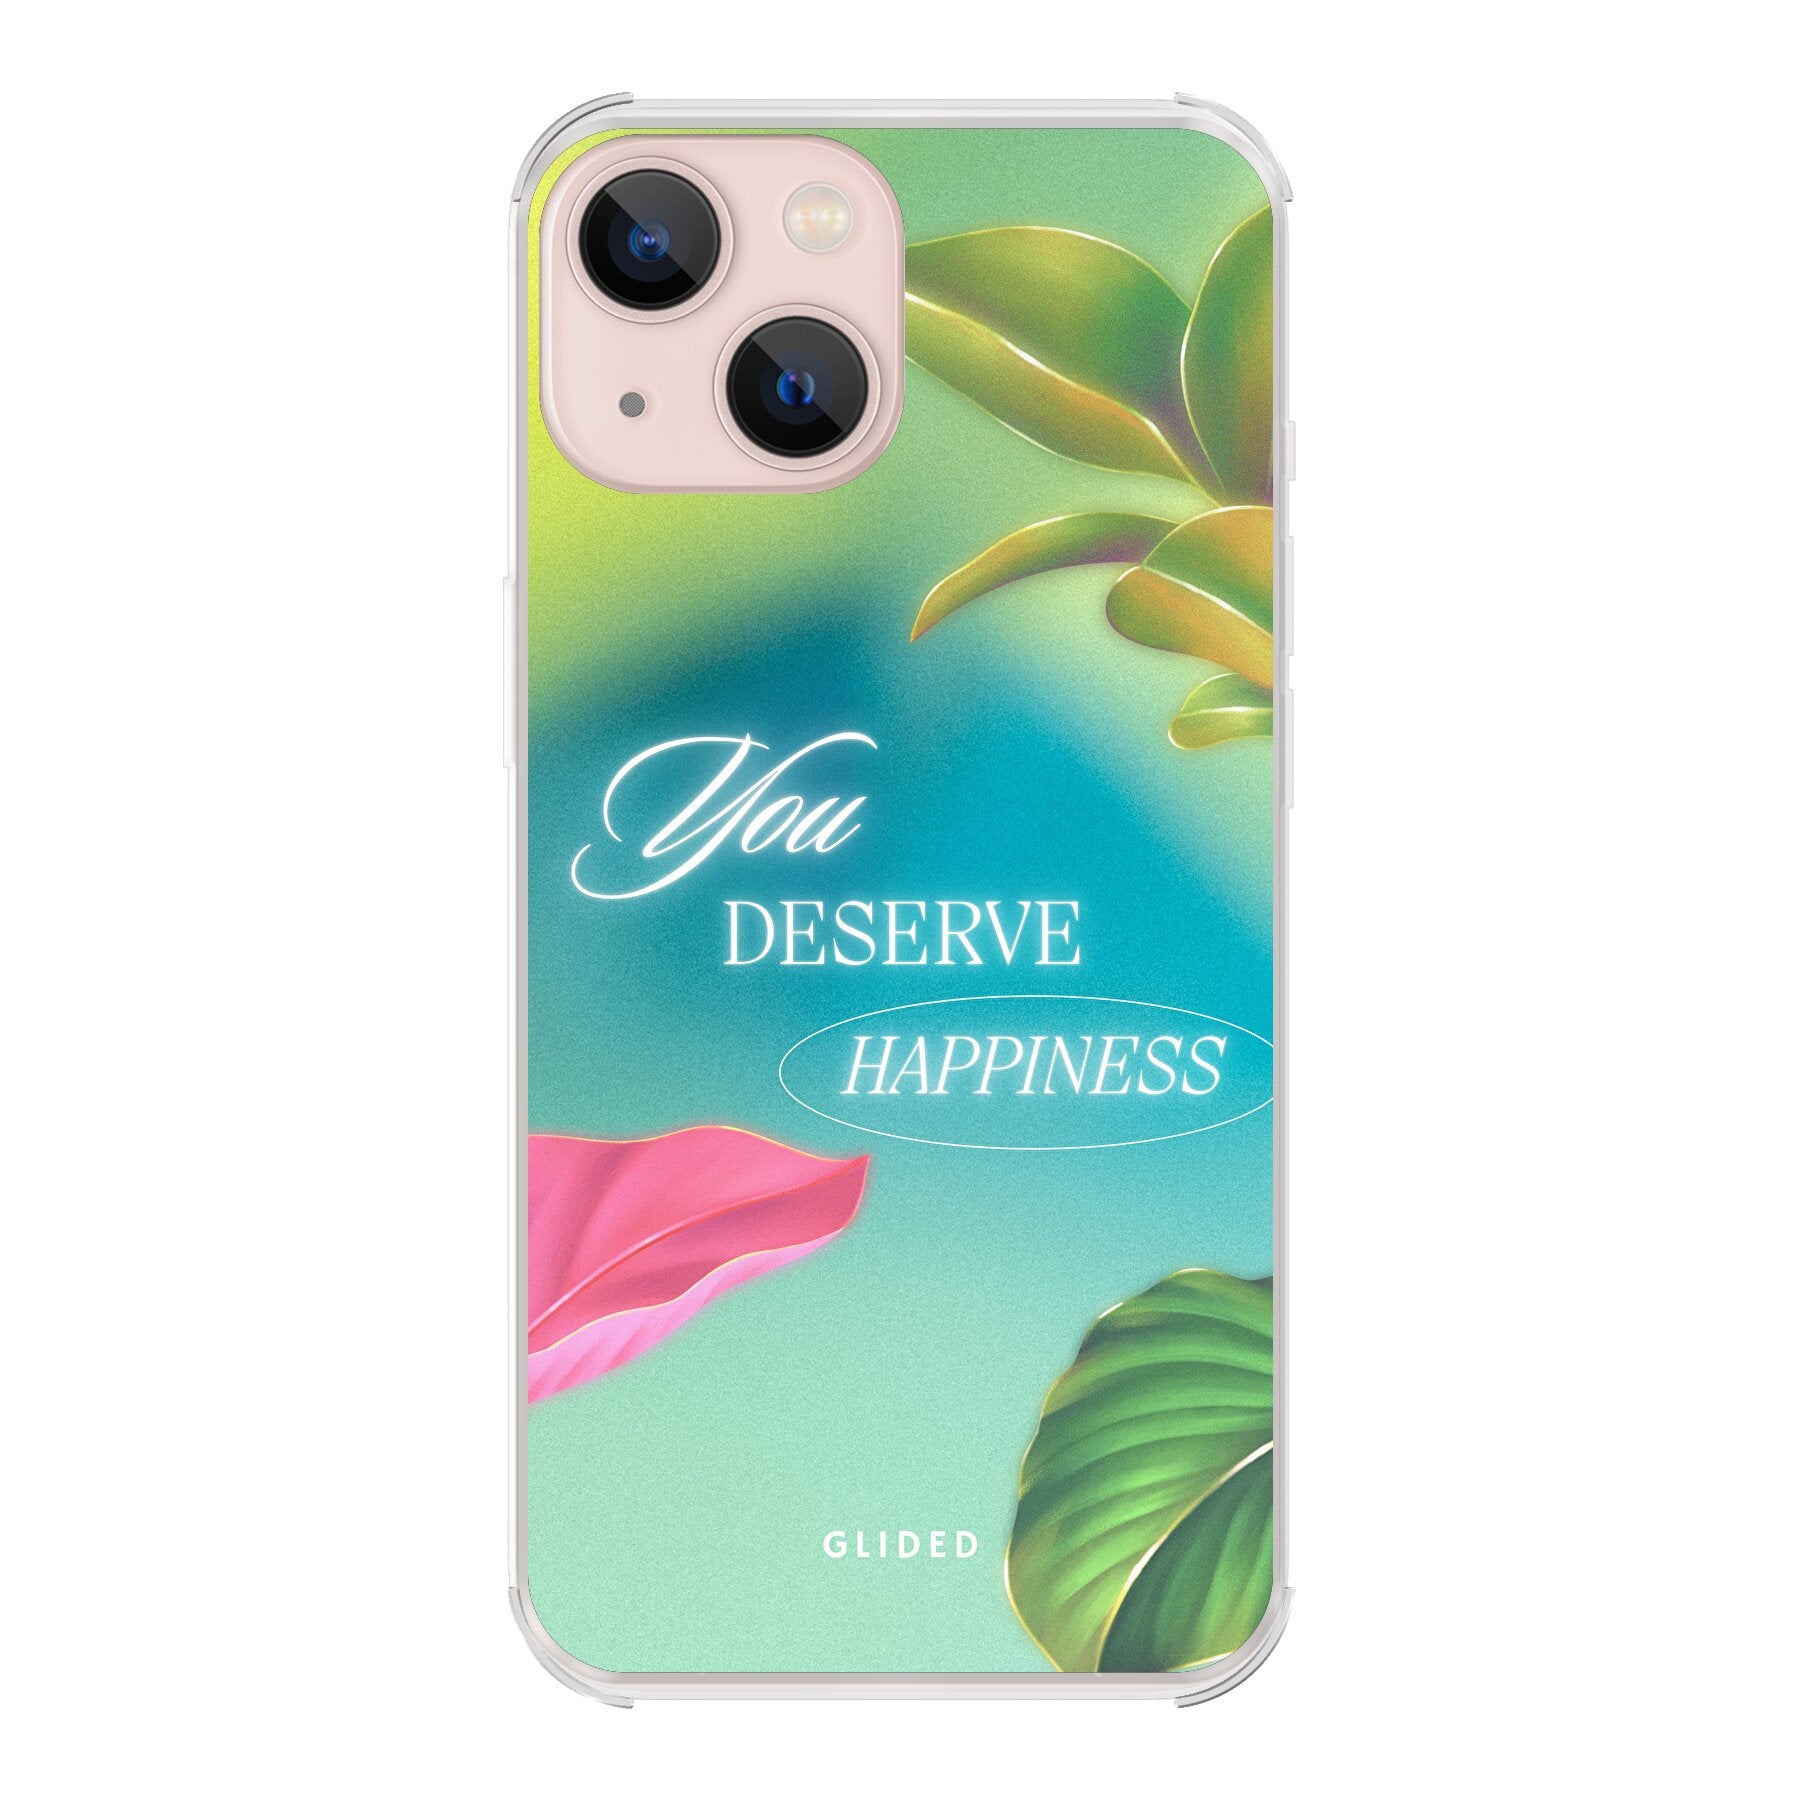 Happiness - iPhone 13 - Bumper case